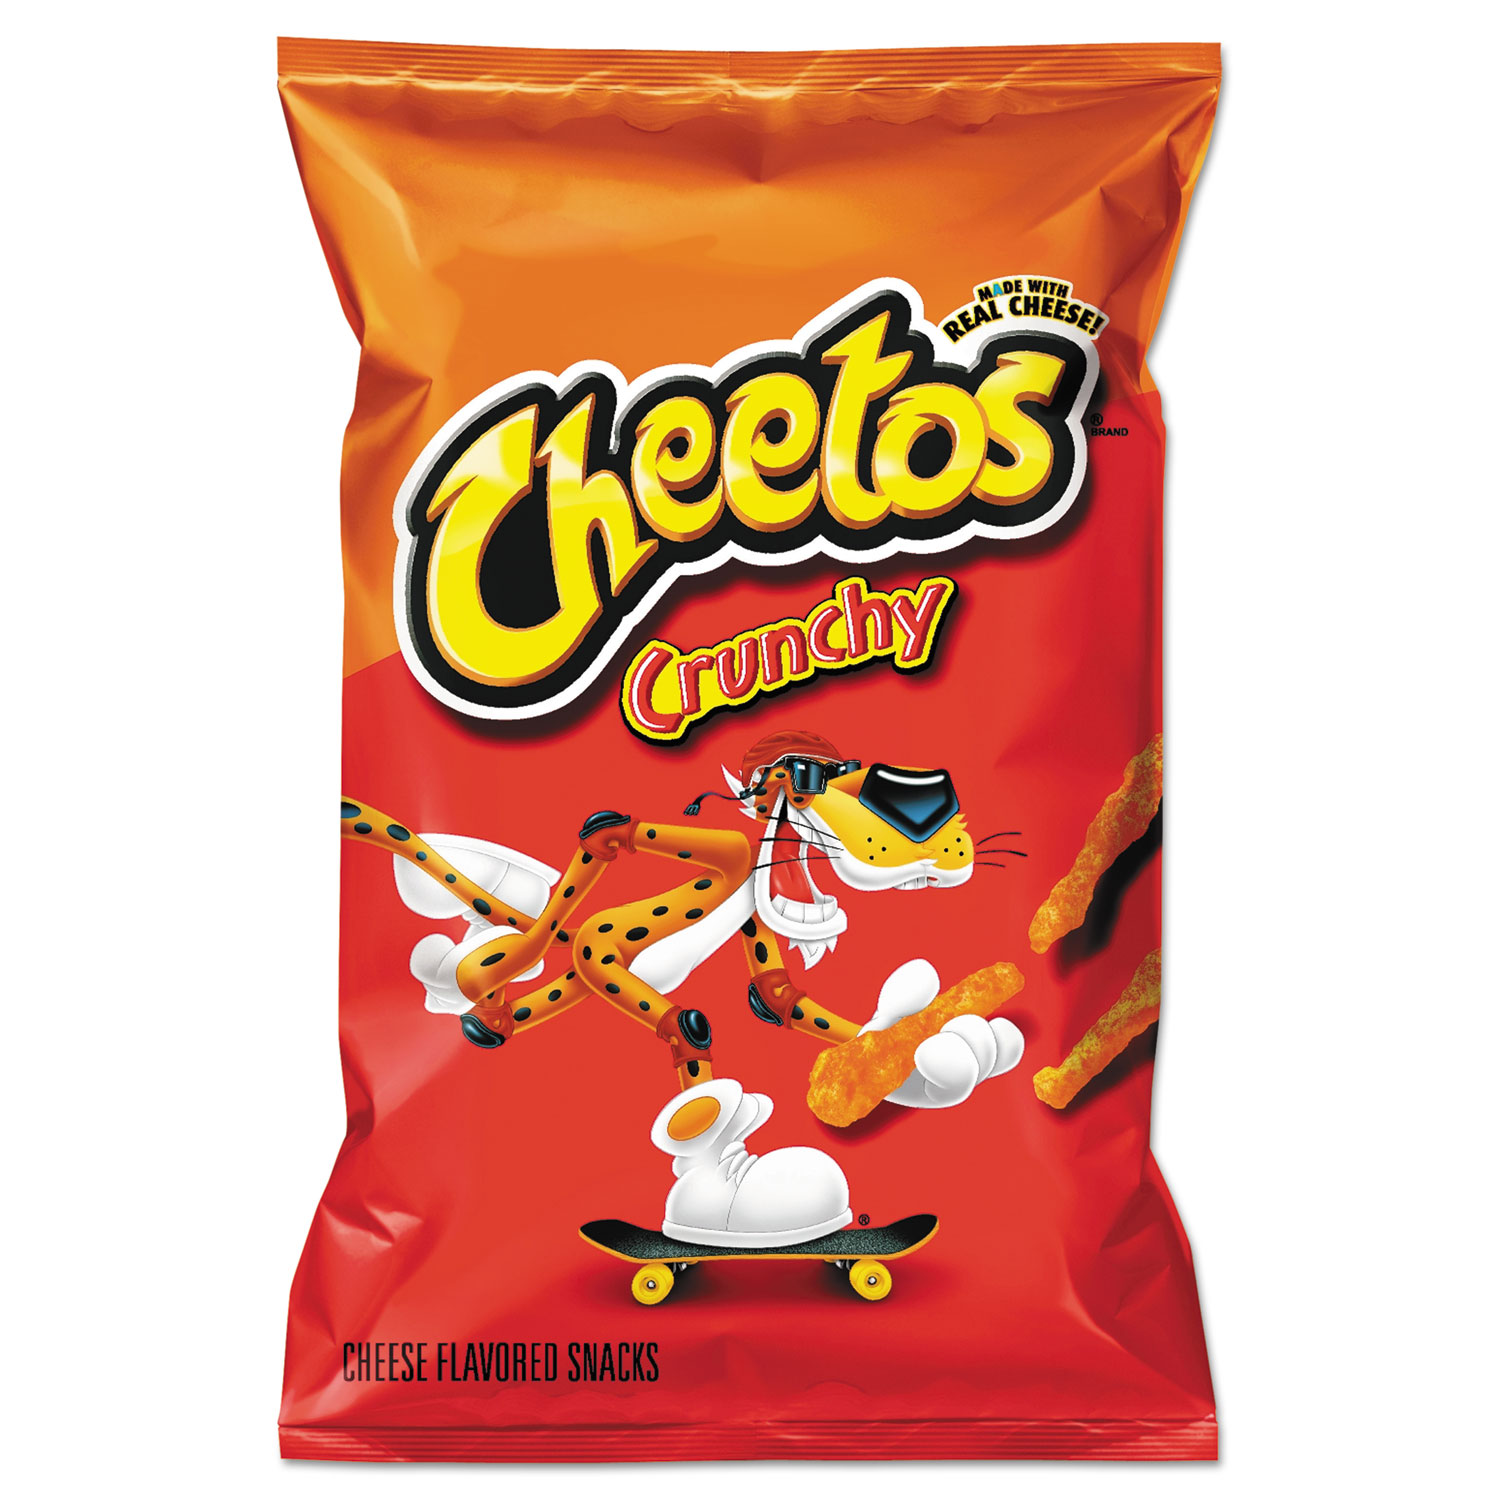 Cheetos Flamin Hot Cheese Flavored Snacks Plastic Bag Plastic Bag 16 Ounce  Size - 6 Per Case.